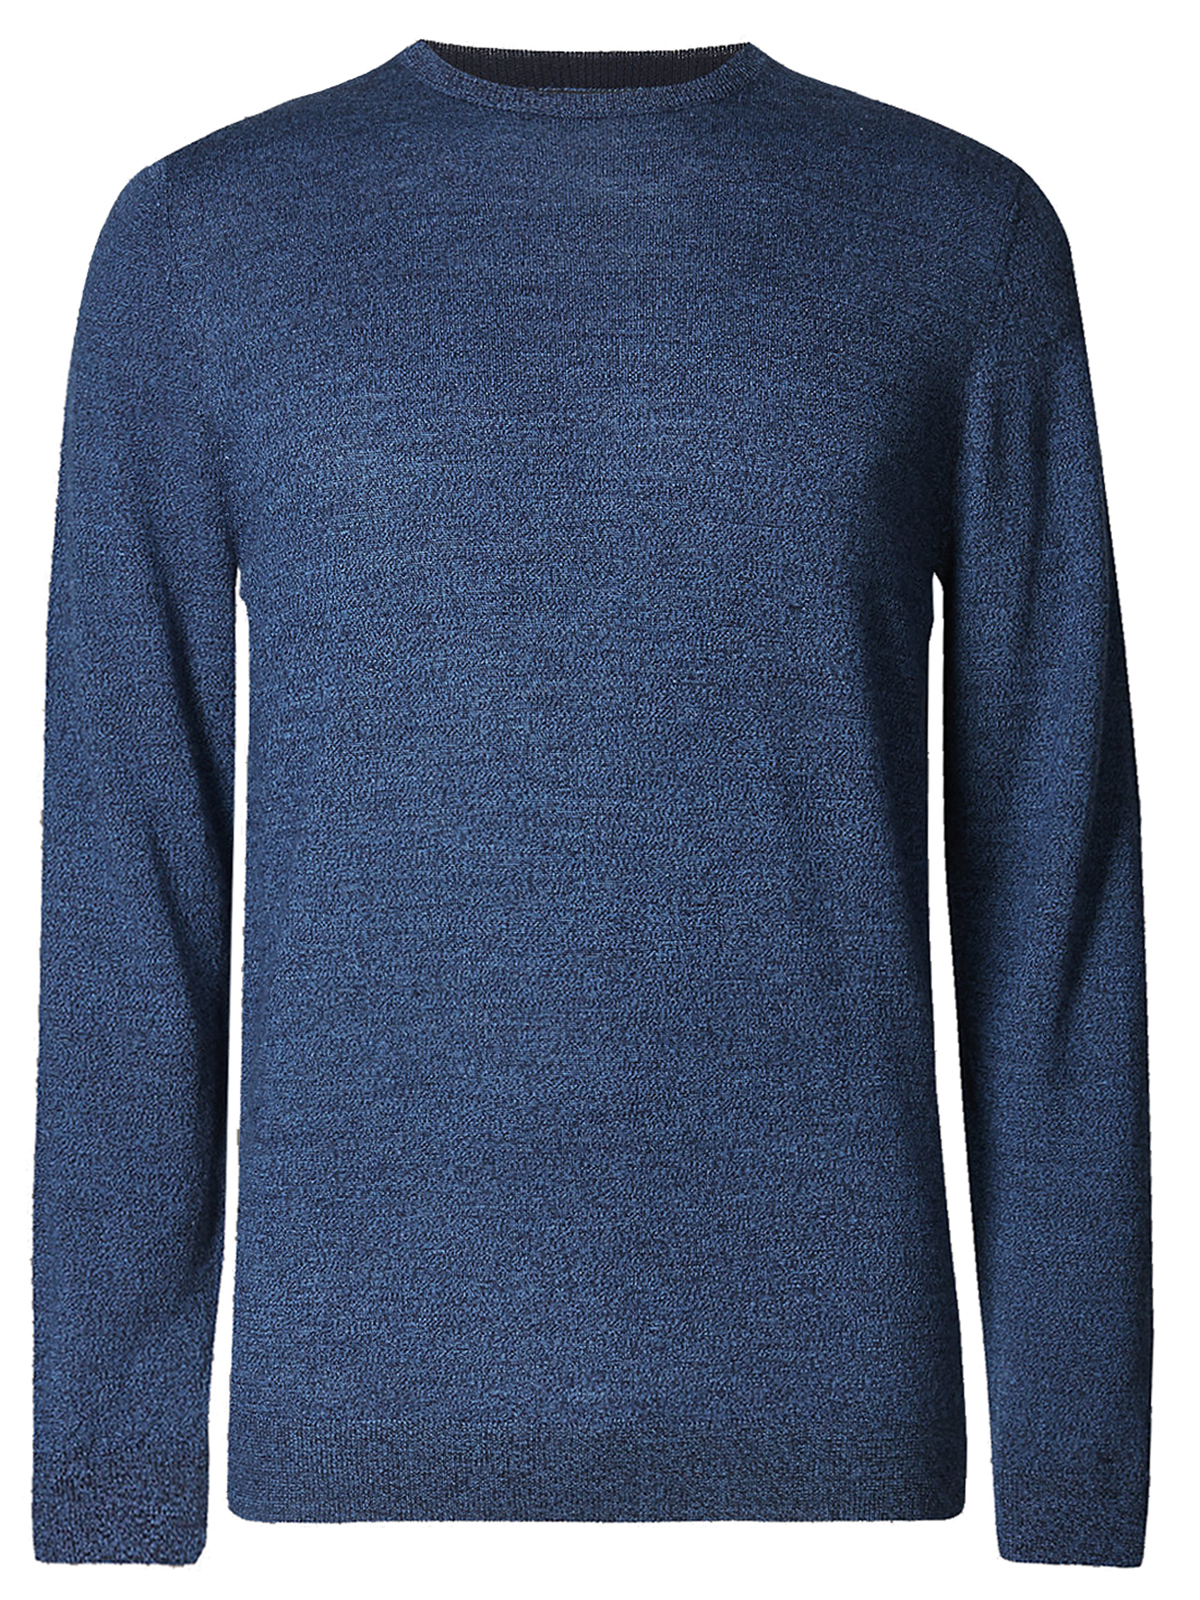 Marks and Spencer - - M&5 BLUE Mix Men's Blue Mix Pure Merino Wool Crew ...